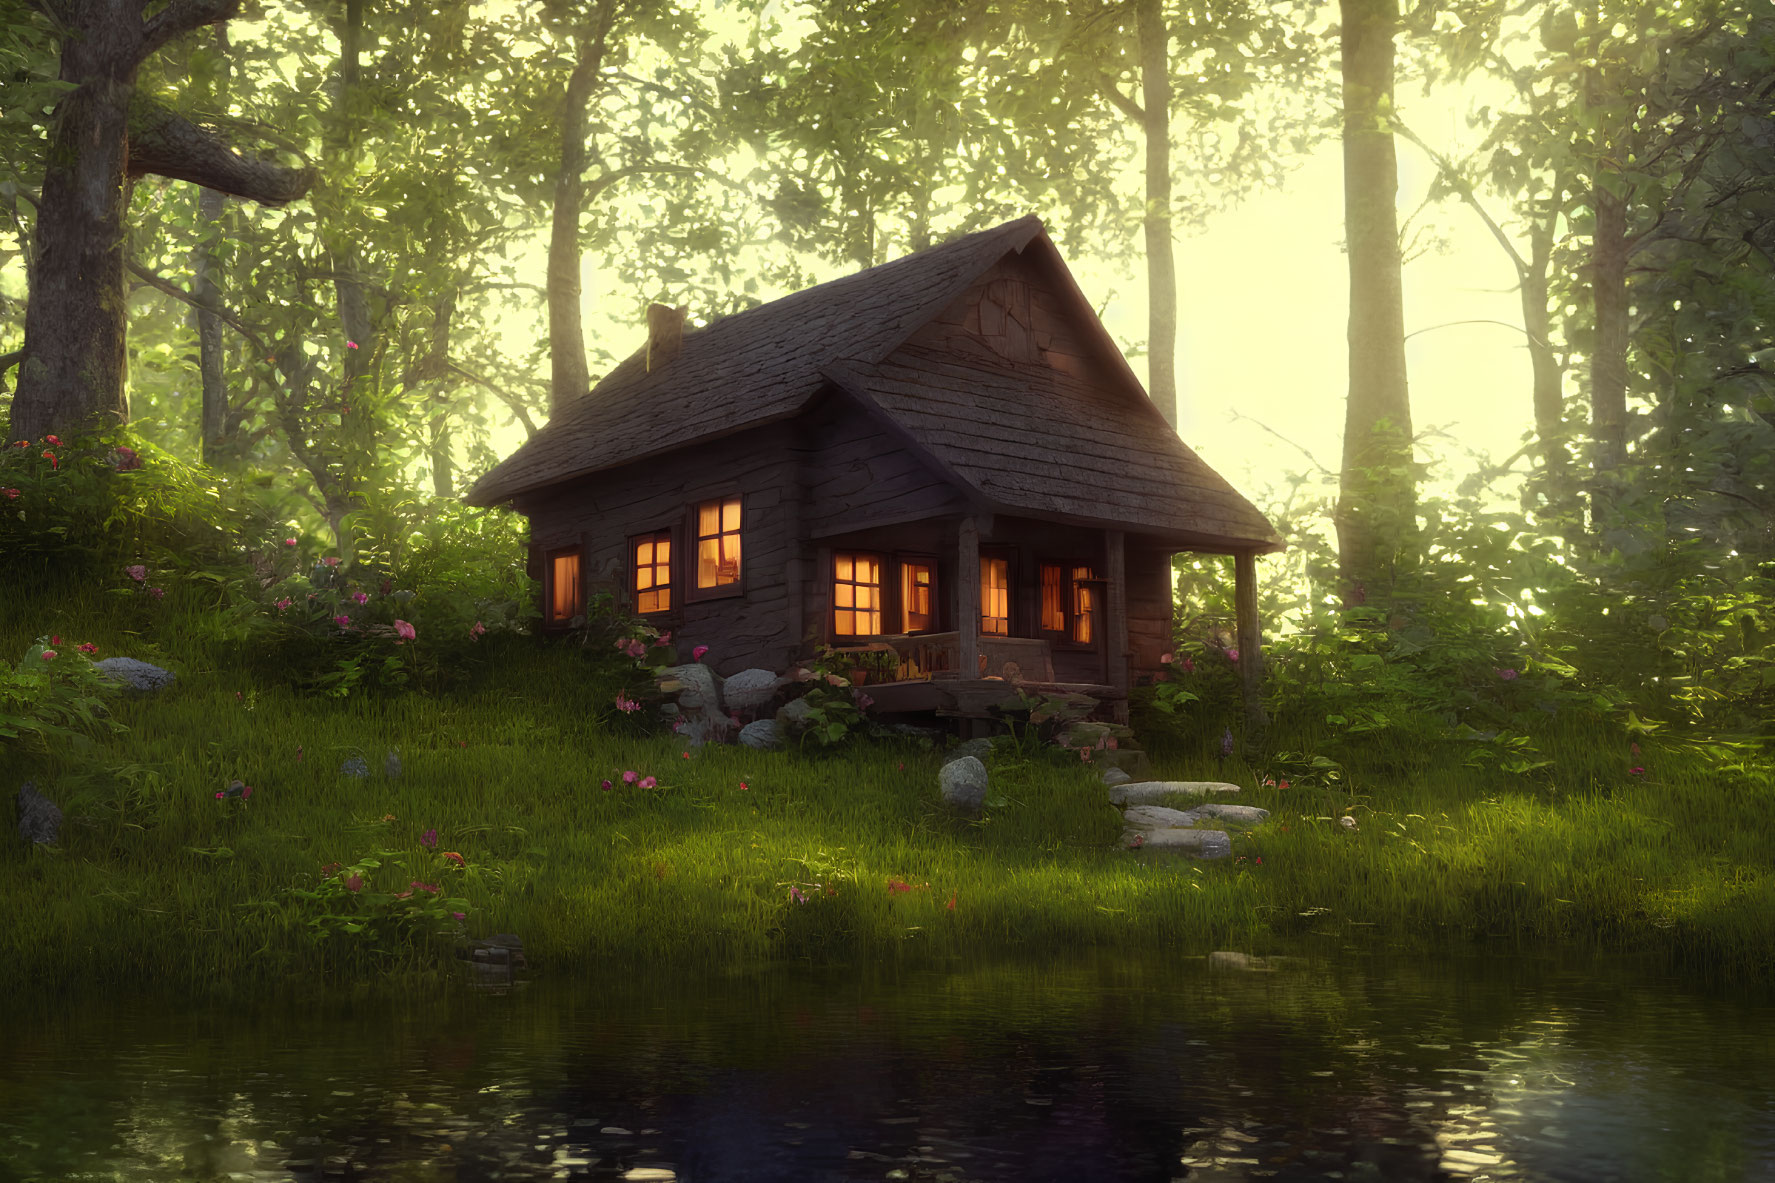 Wooden cabin in lush forest by tranquil pond with lit interior